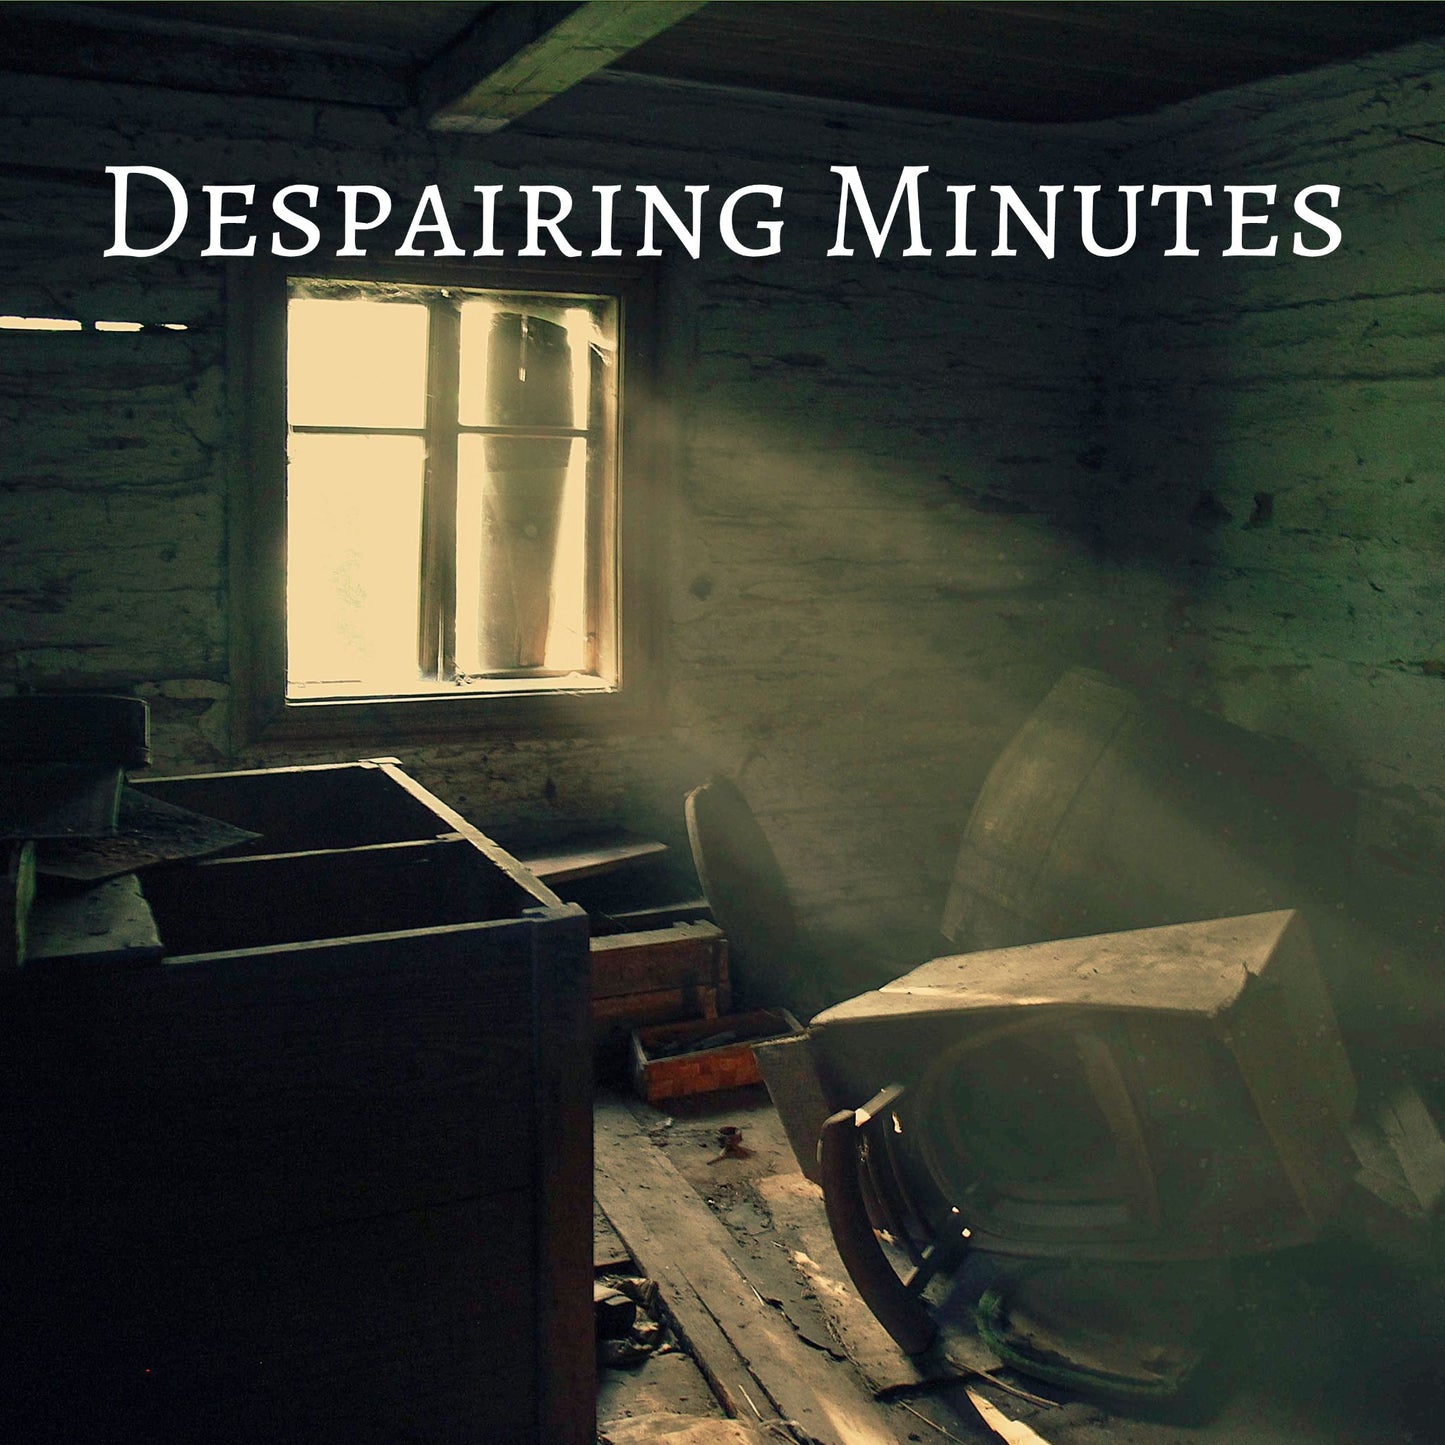 CD Cover of song Despairing Minutes